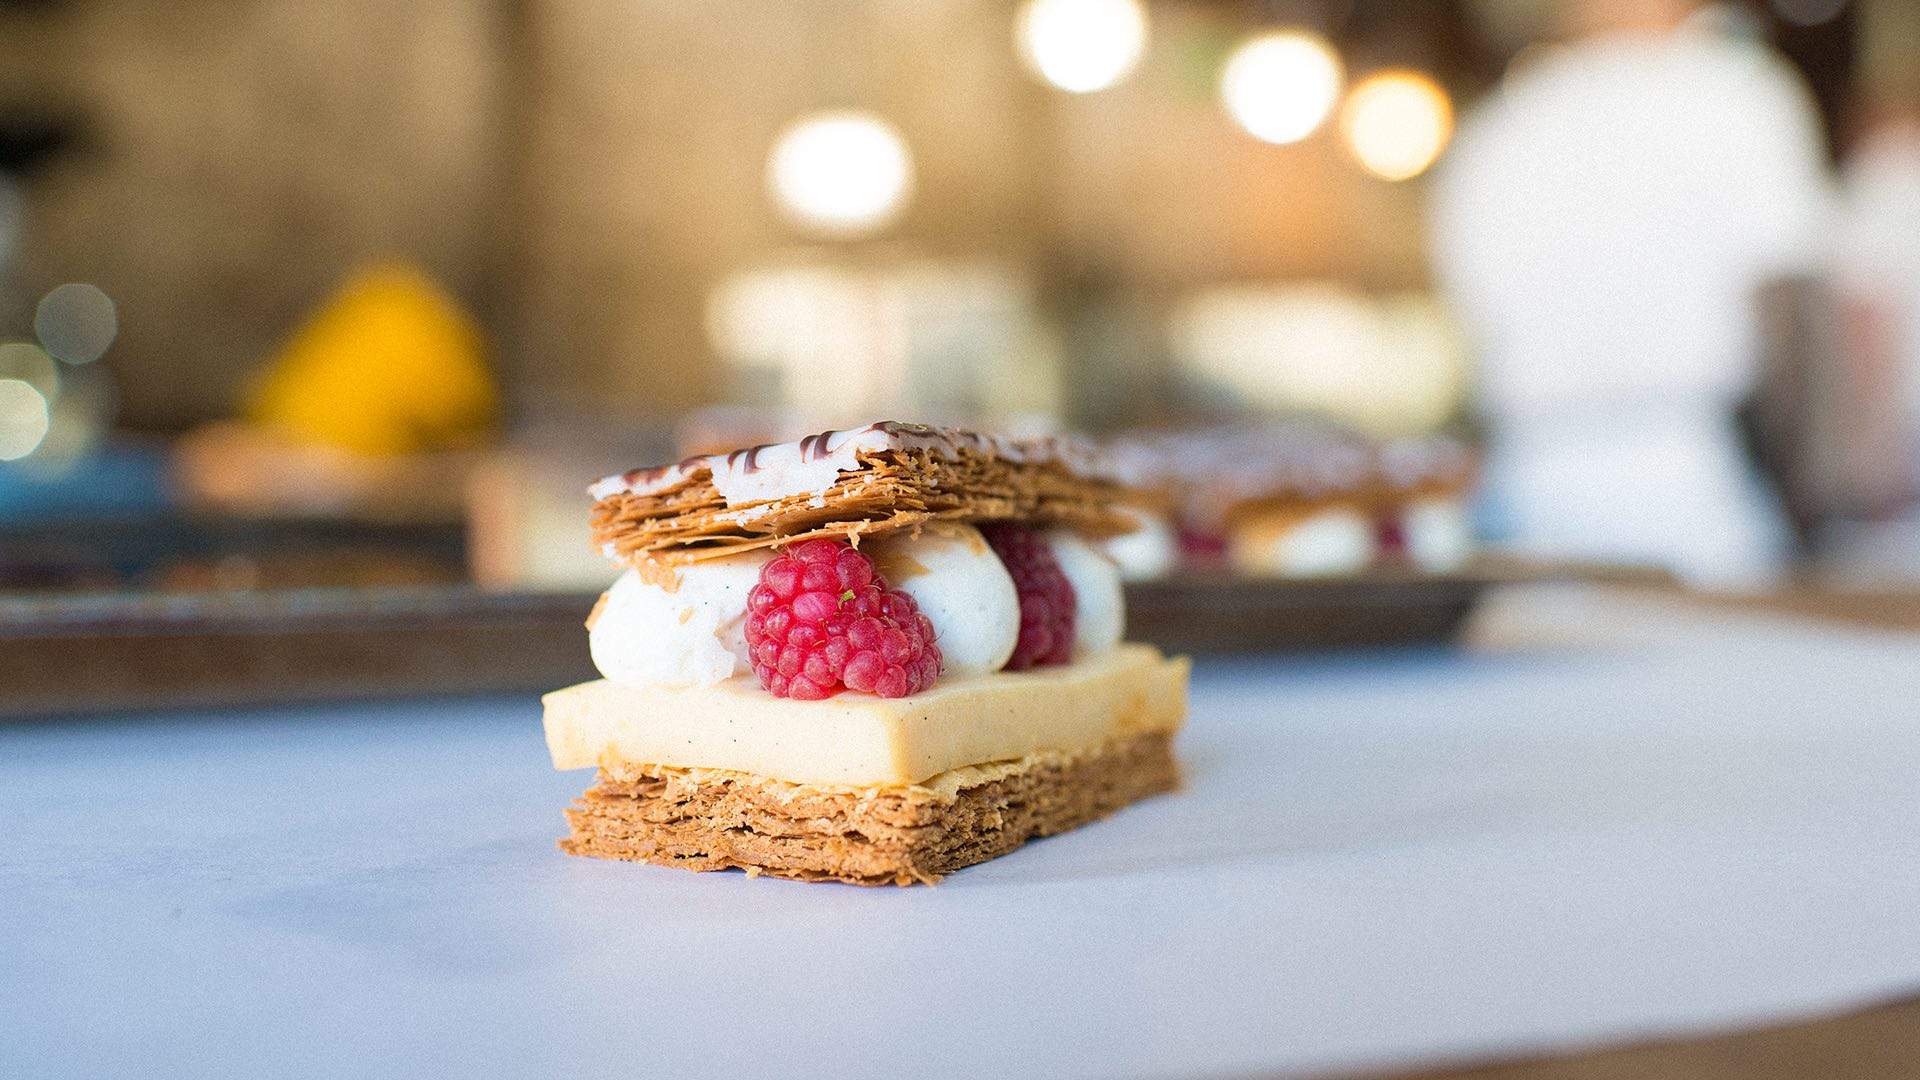 A Pastry Pop-Up Has Opened Inside Brewtown Newtown